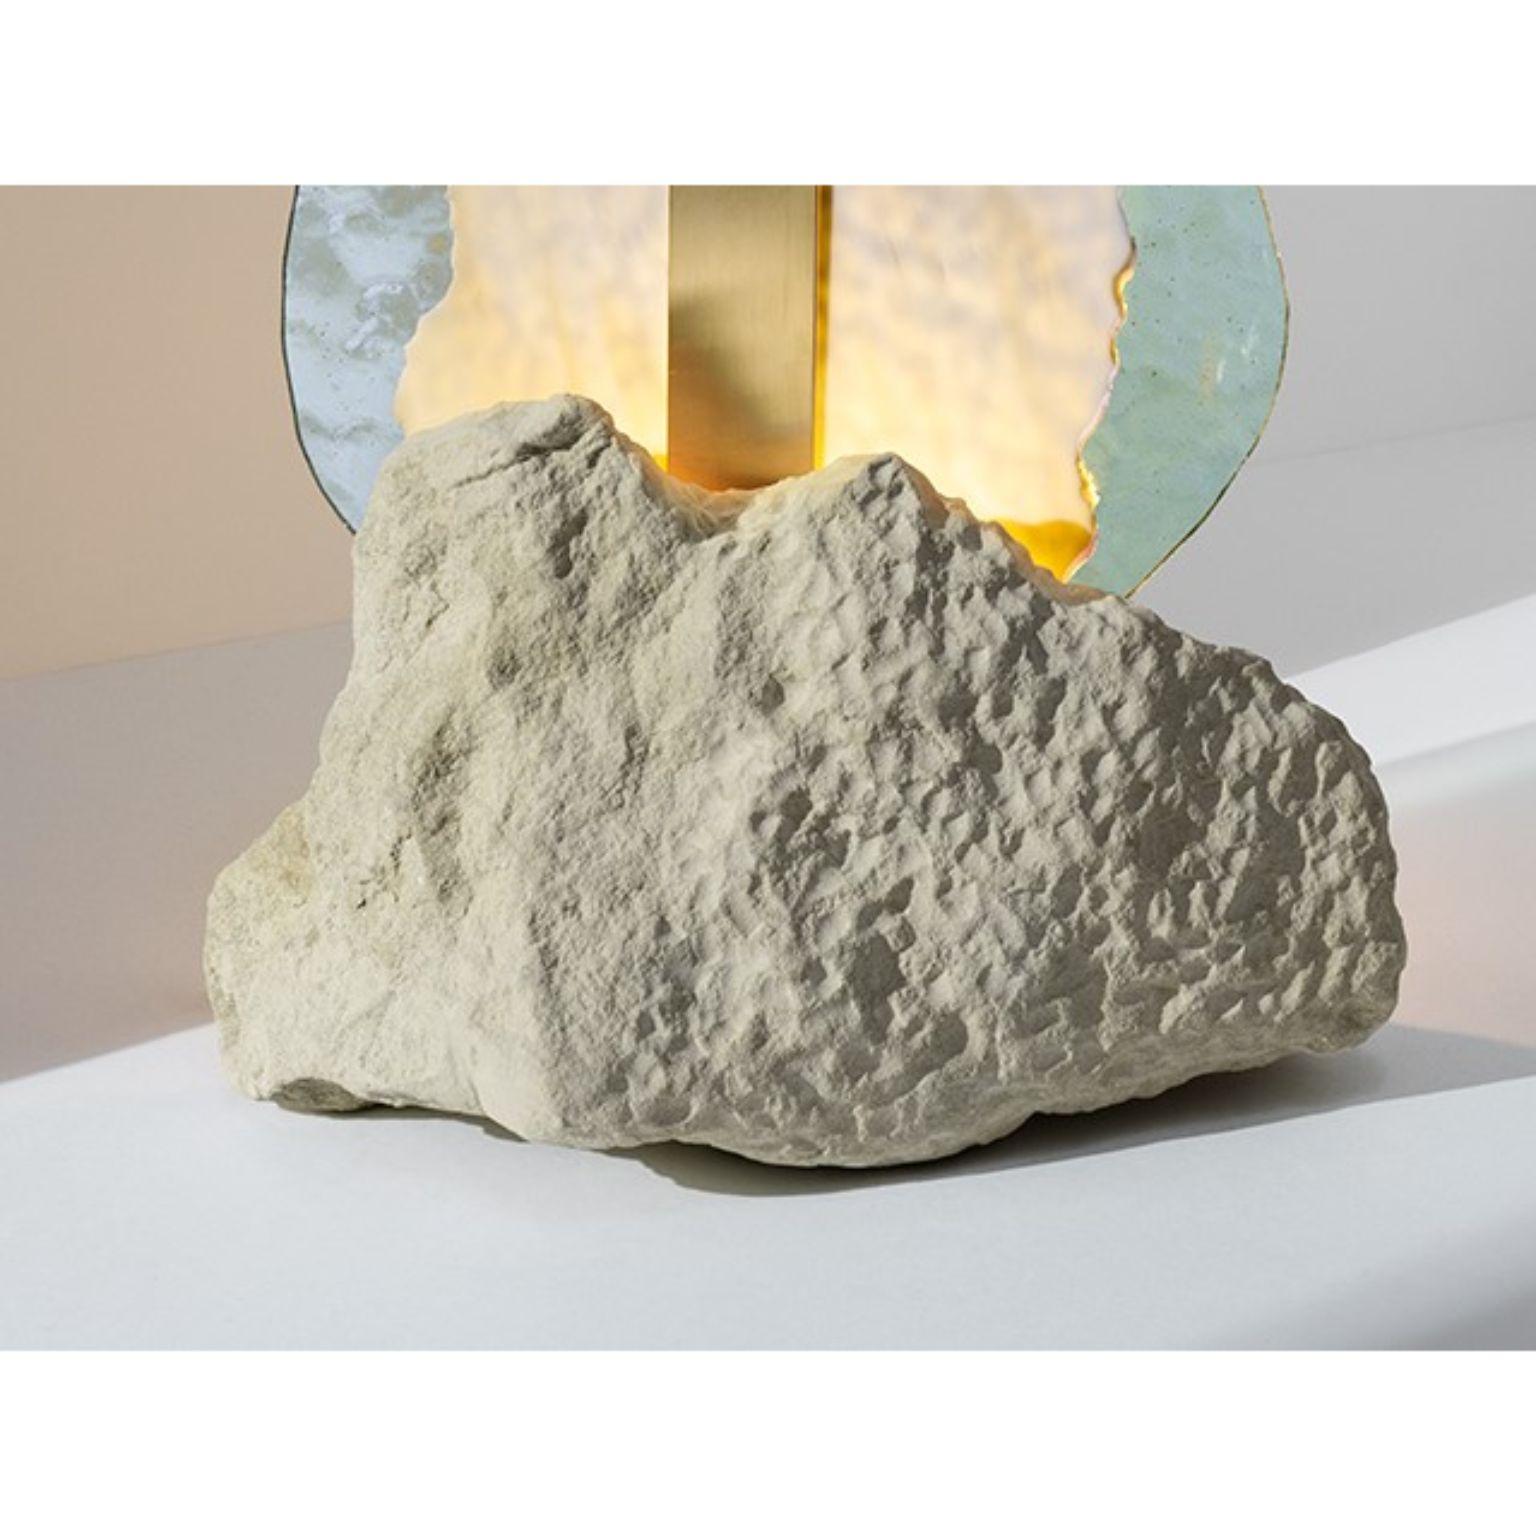 French Calanque Light Sculpture by Precious Artefact